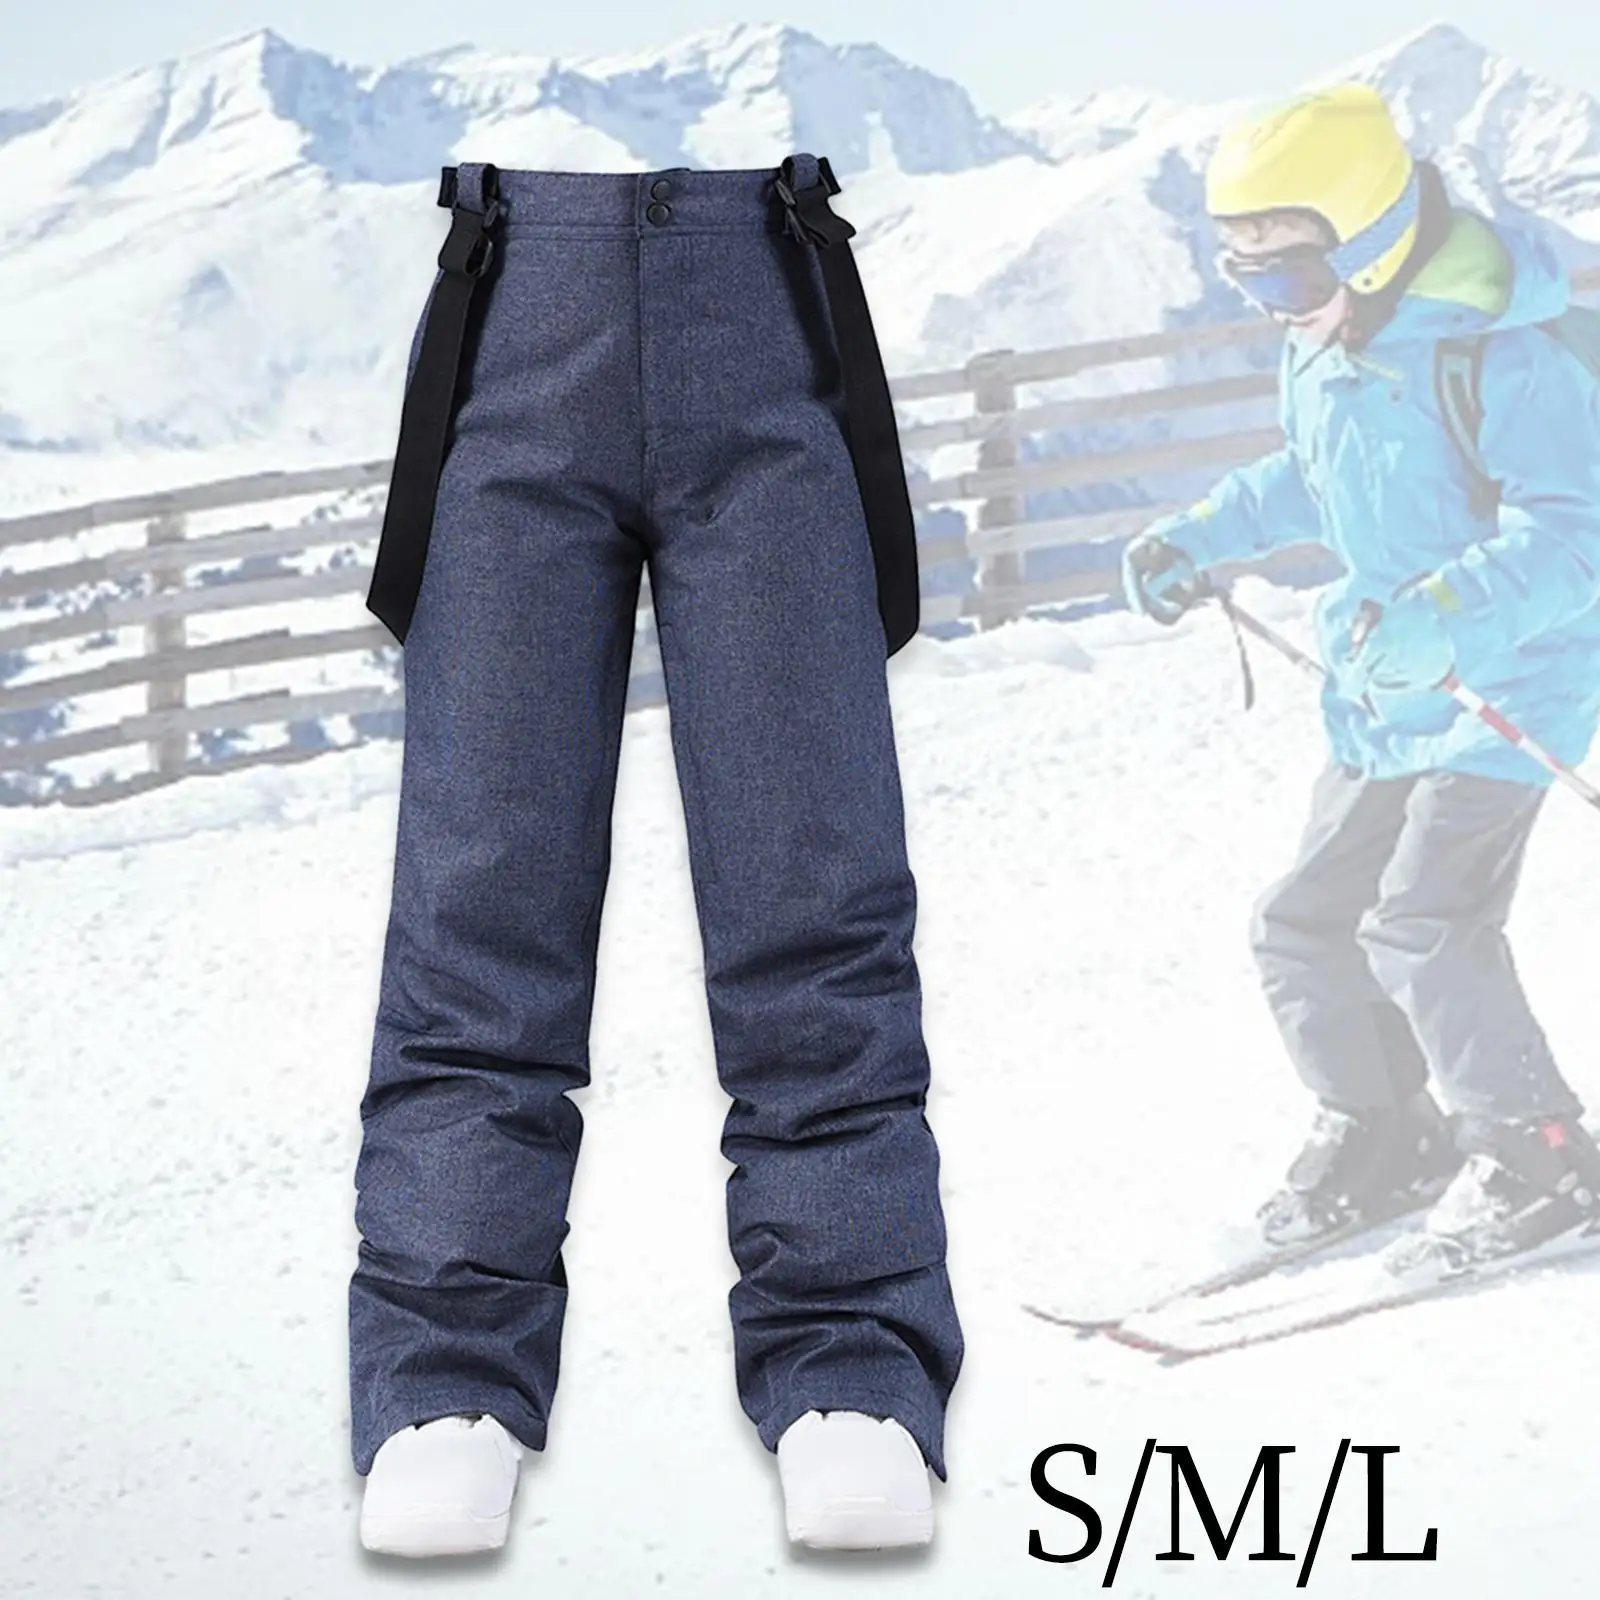 Snow Ski Pants Insulated Warm Windproof Thick Full Length Breathable Waterproof Winter Skiing Cargo Pants Ripstop Ski Trousers